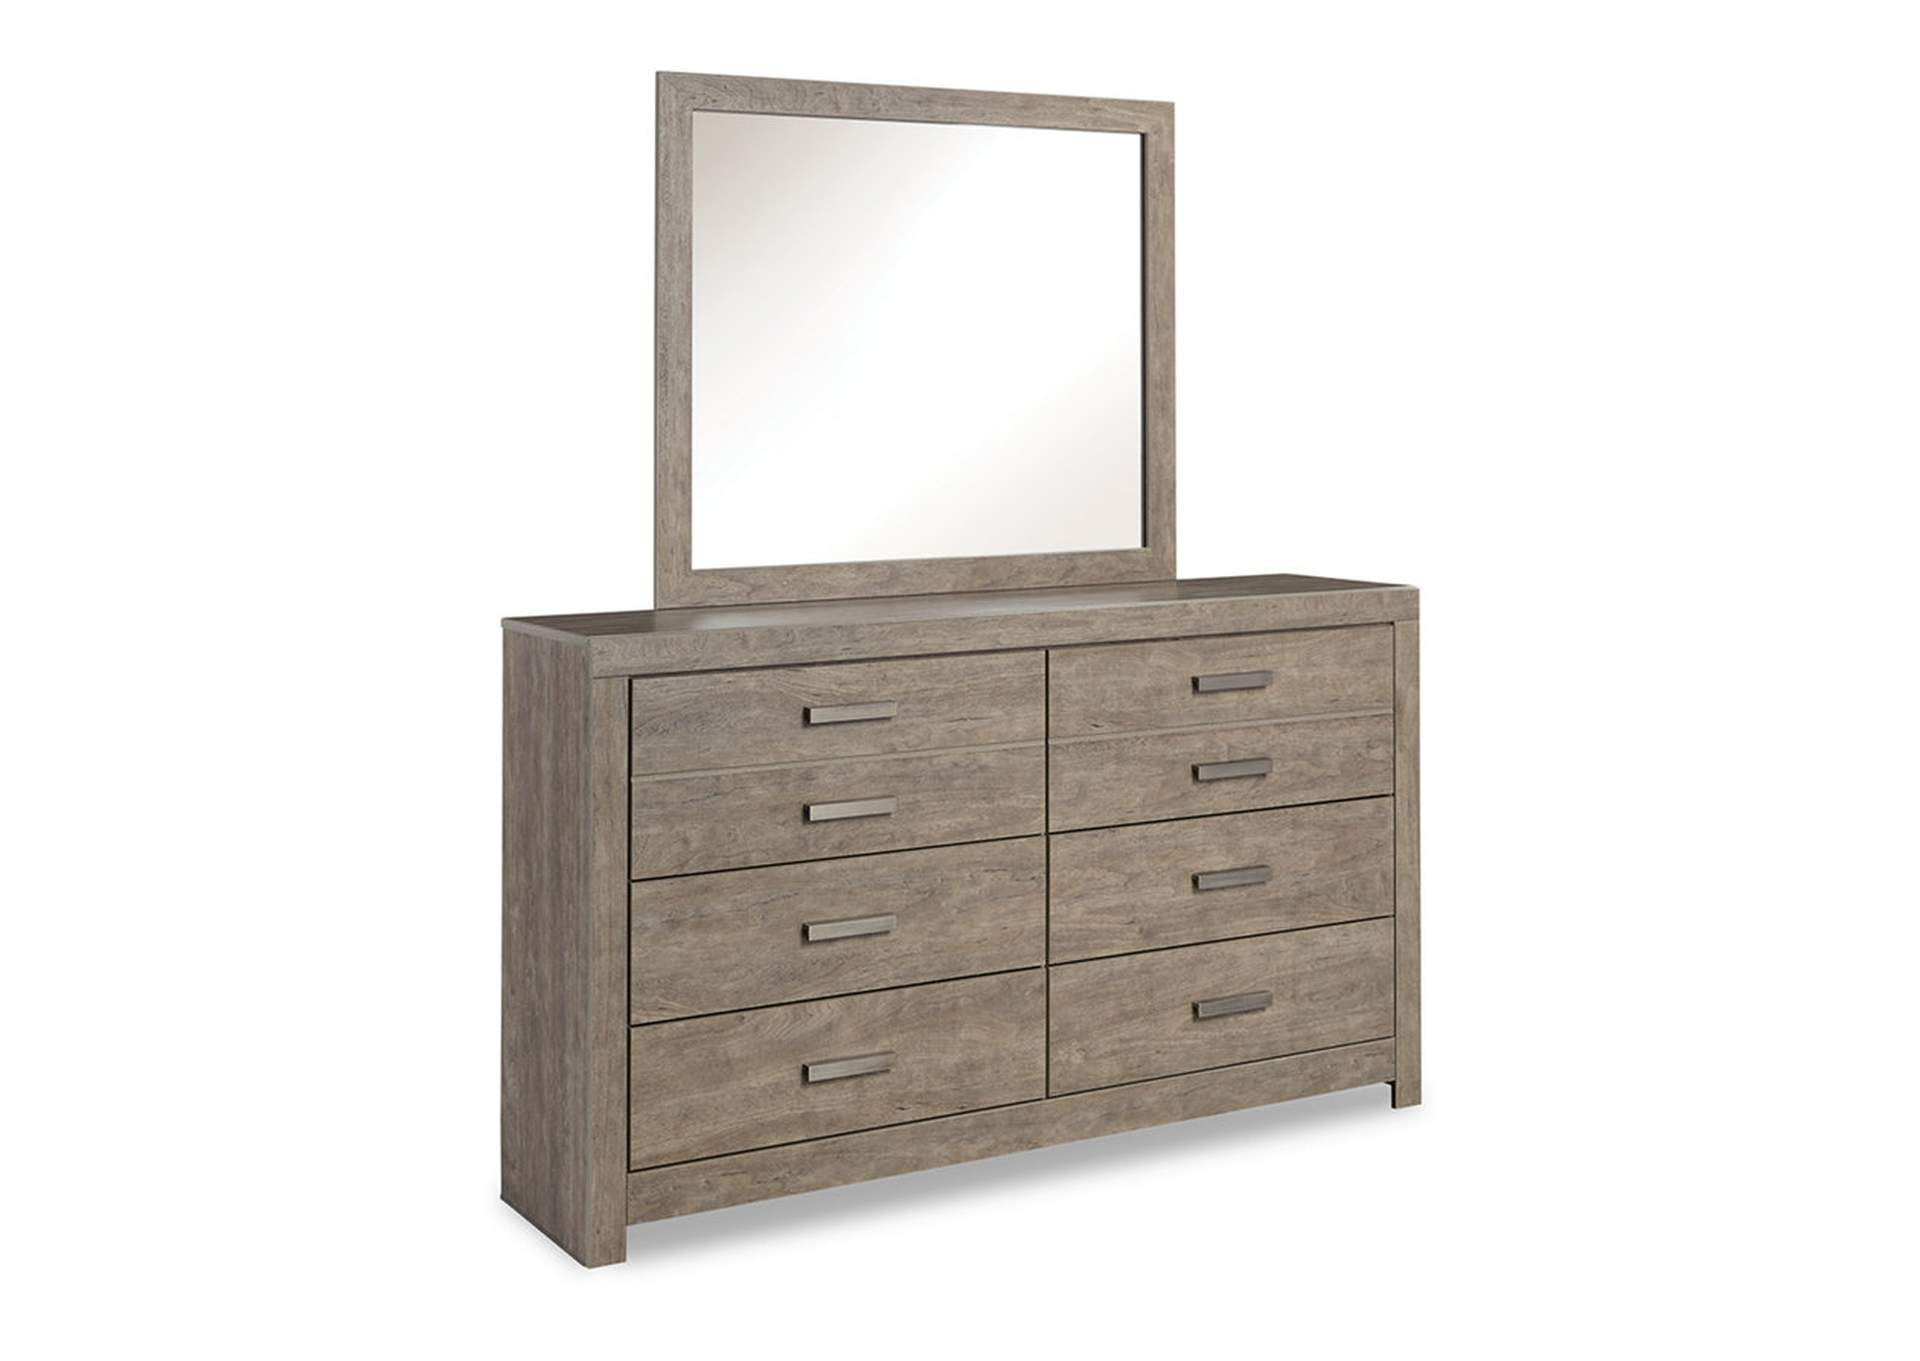 Culverbach Queen Panel Bed with Dresser and Mirror, Chest and 2 Nightstands,Signature Design By Ashley